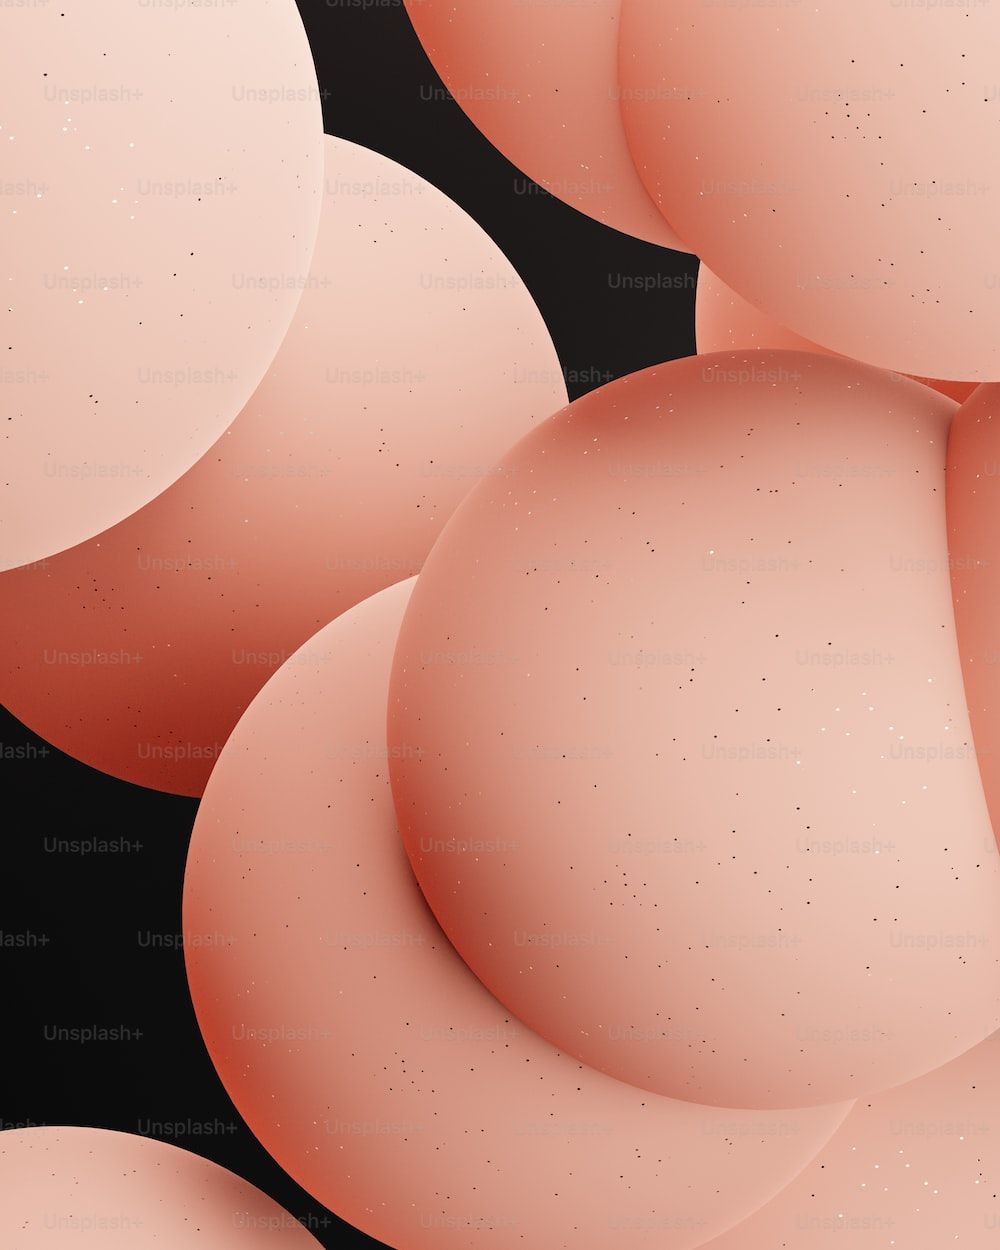 An abstract image of a group of pink circles - Peach